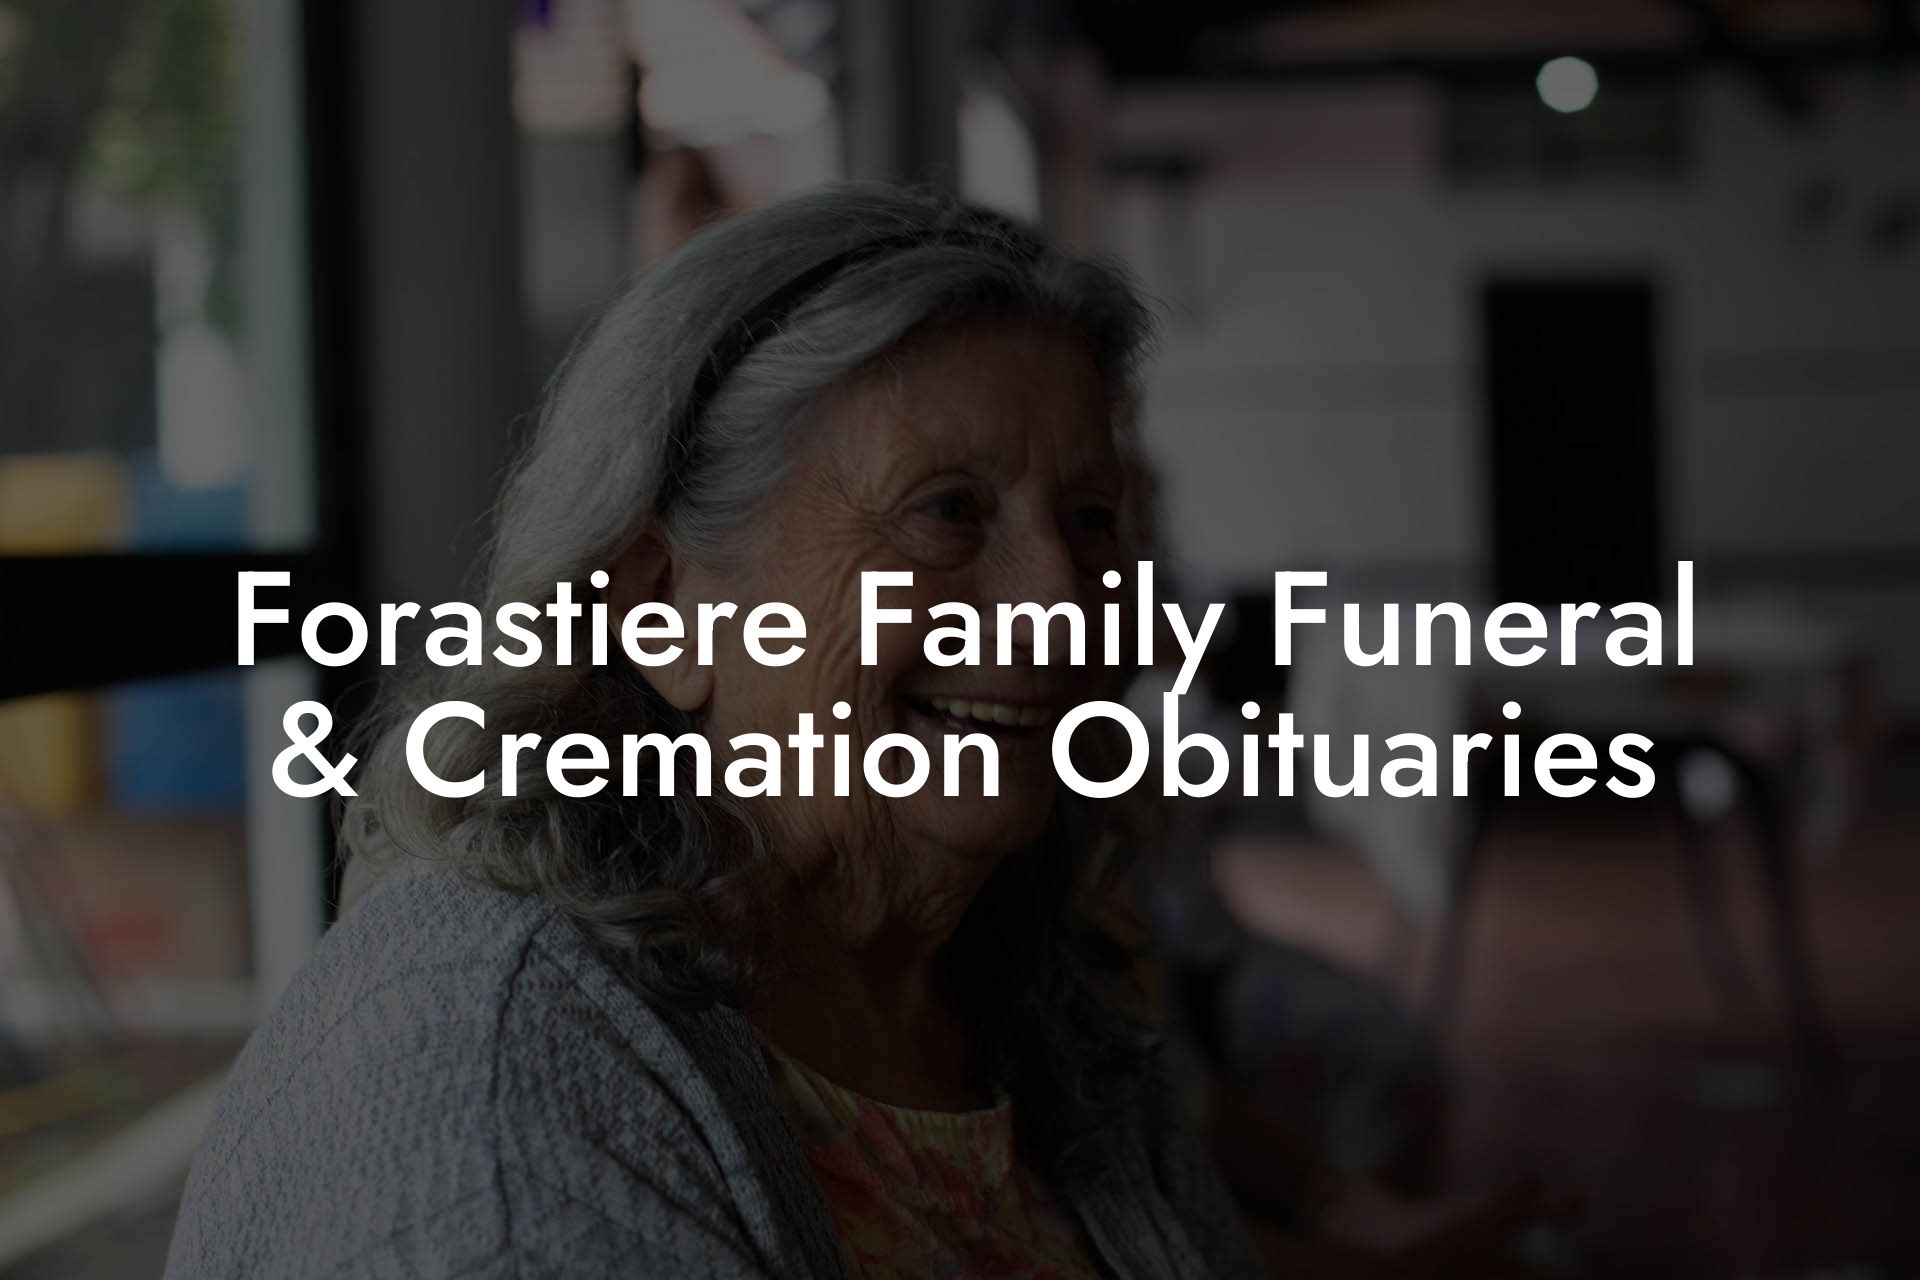 Forastiere Family Funeral & Cremation Obituaries